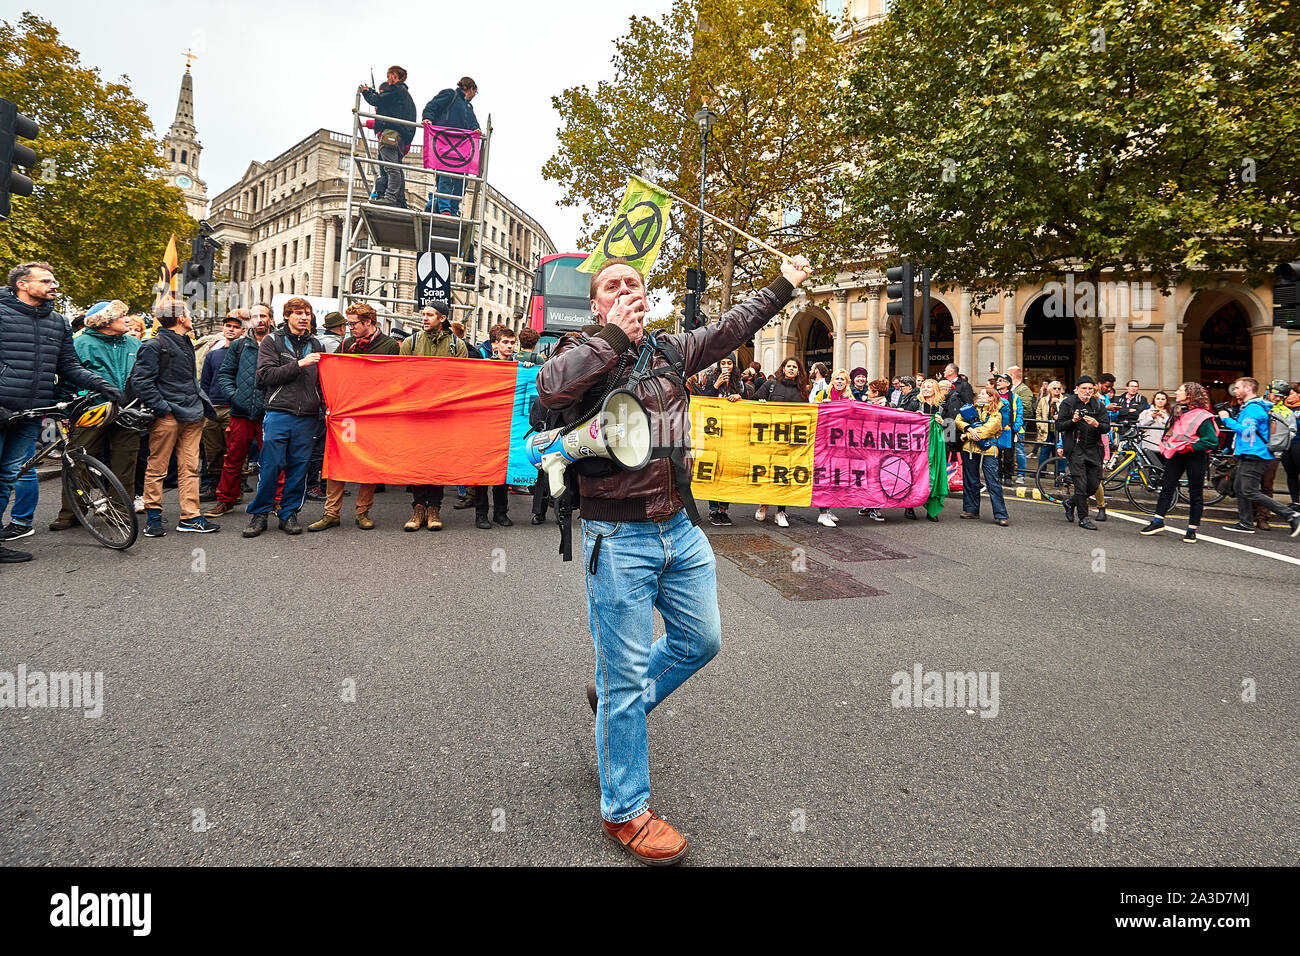 London, U.K. - Oct 7, 2019: Environmental campaigners from Extinction Rebellion protesting in Trafalgar Square on the first day of a planned two weeks of protests. Stock Photo